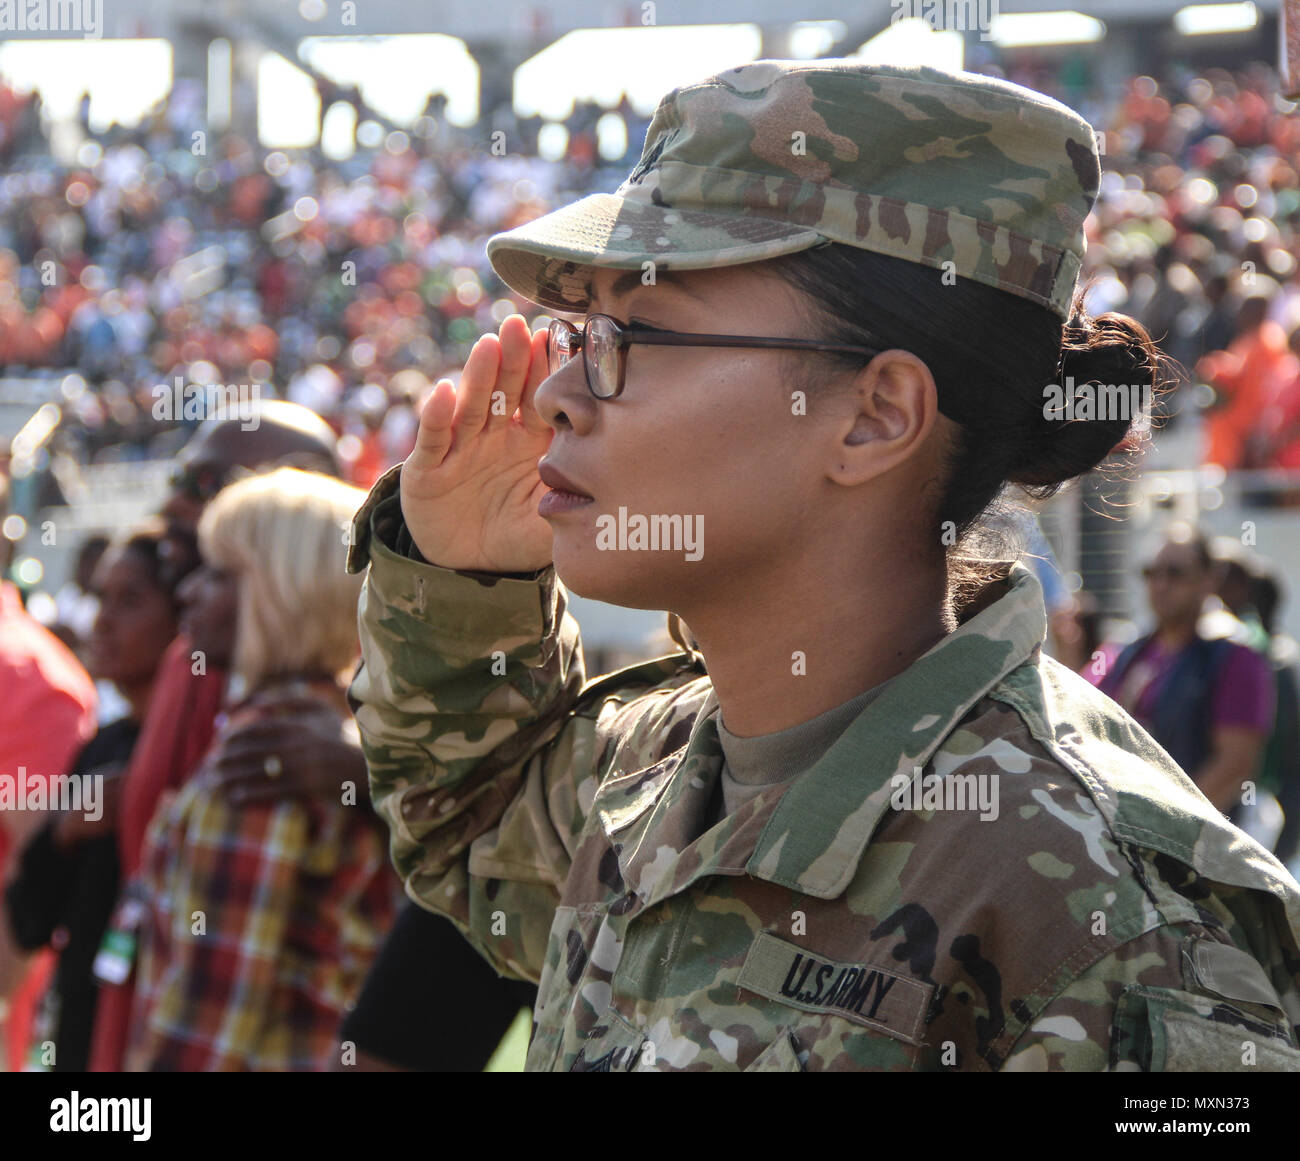 Army Staff Sgt. Sasha K. Adams, a female engagement team member for the Miami Recruiting Battalion, renders a salute as the national anthem plays inside Camping World Stadium in Orlando, Fla. Adams, a native of Ft. Worth, Texas, was one of several Soldiers from active duty and Reserve units received exclusive access to the field during the Florida Classic, one of the nation’s largest football rivalries between two historically black colleges: Bethune Cookman University and Florida A&M University. The troops engaged with thousands of fans through various interactive pre-game activities that enc Stock Photo